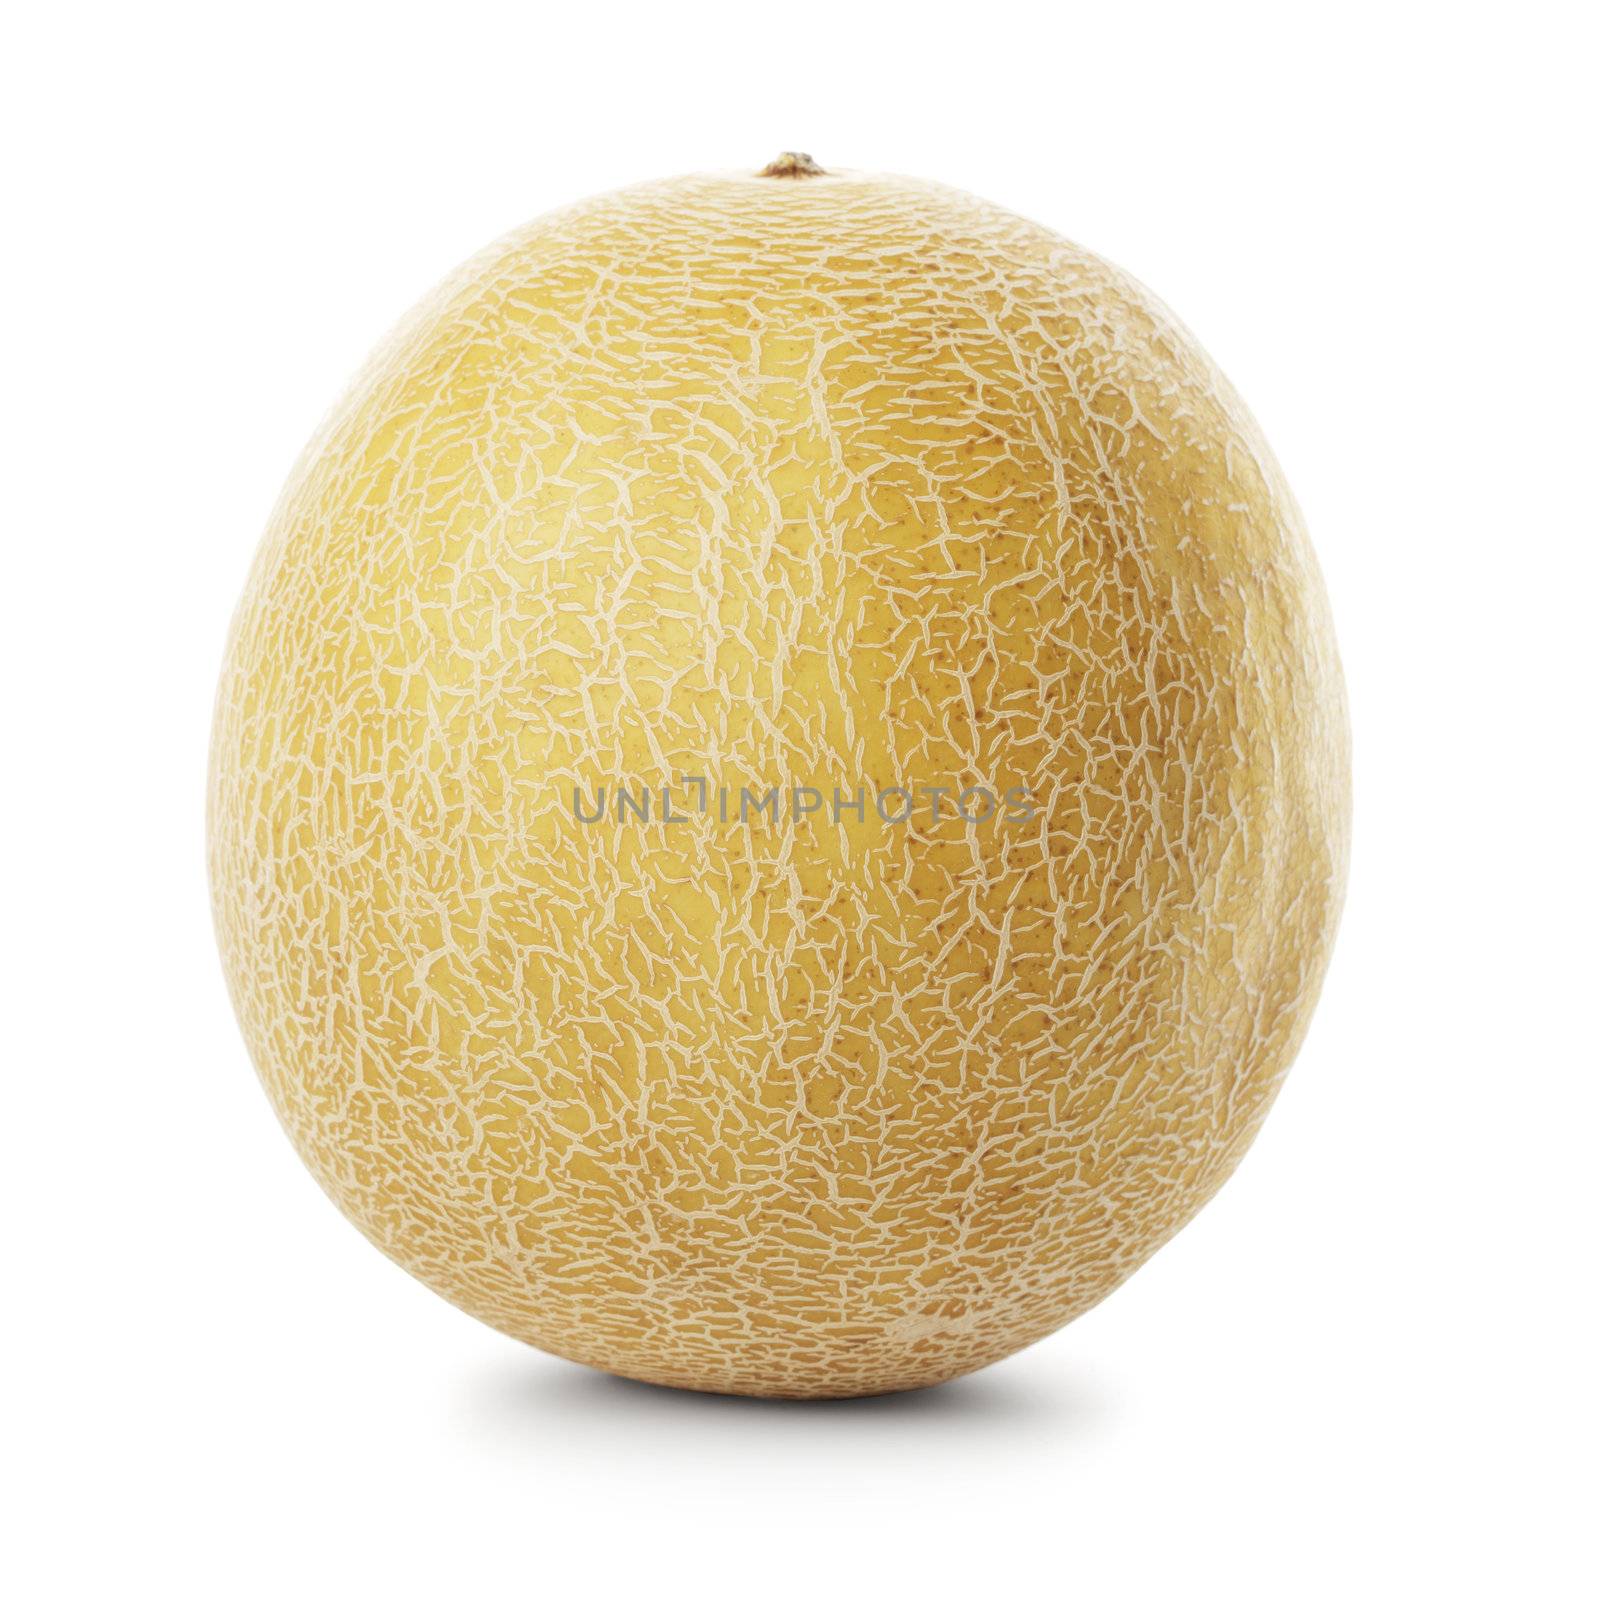 Whole Galia melon isolated on white with shadow